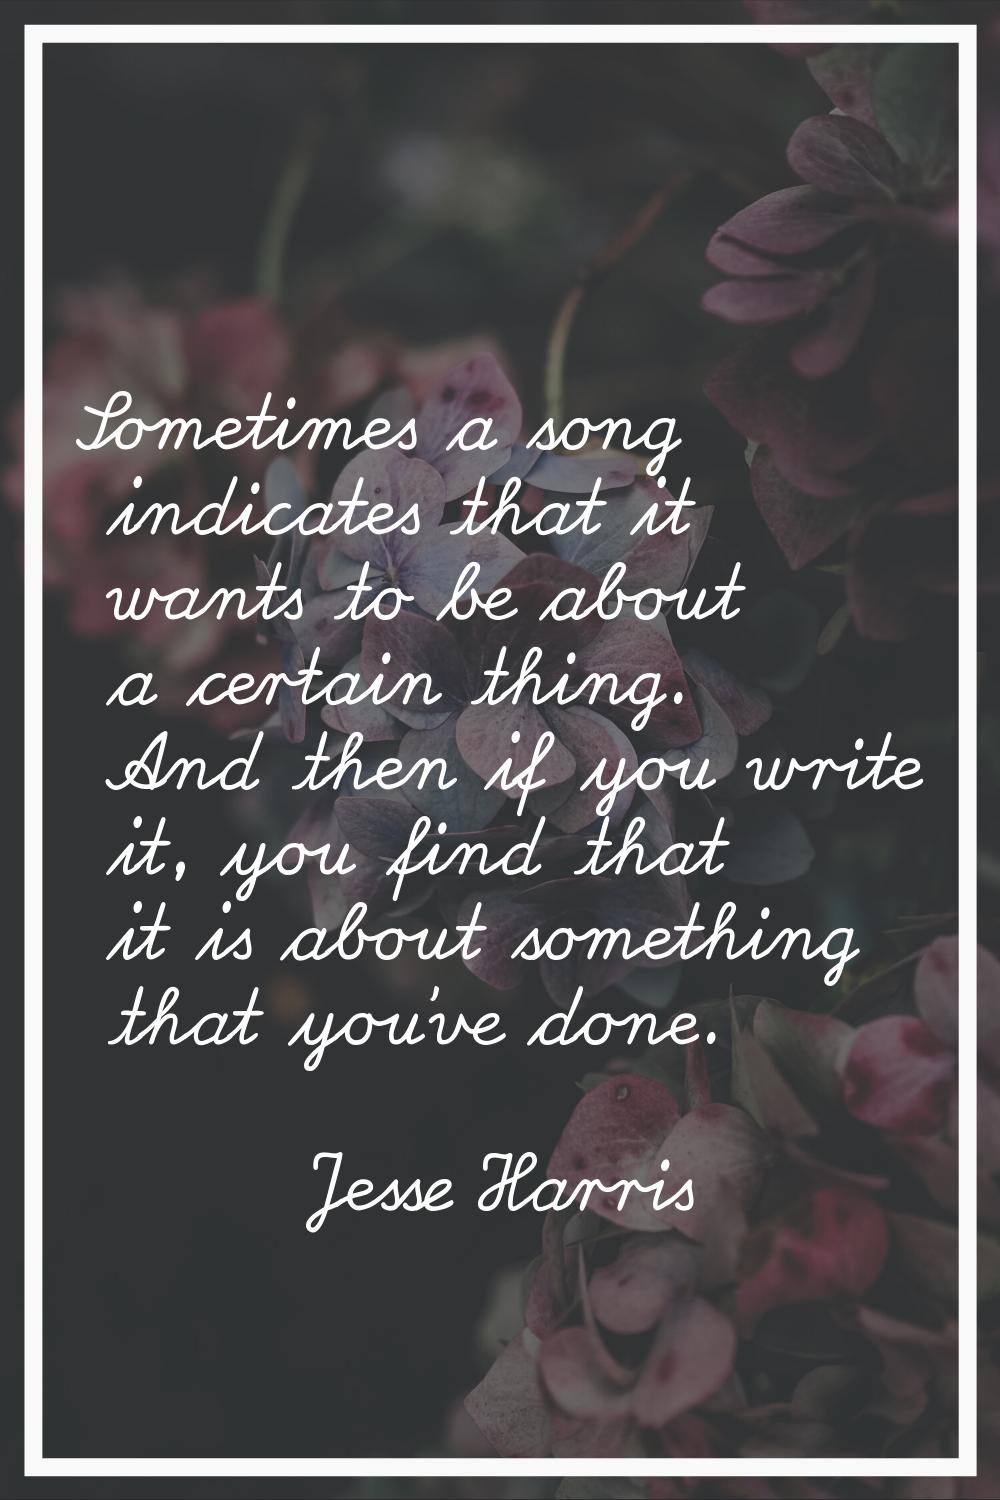 Sometimes a song indicates that it wants to be about a certain thing. And then if you write it, you